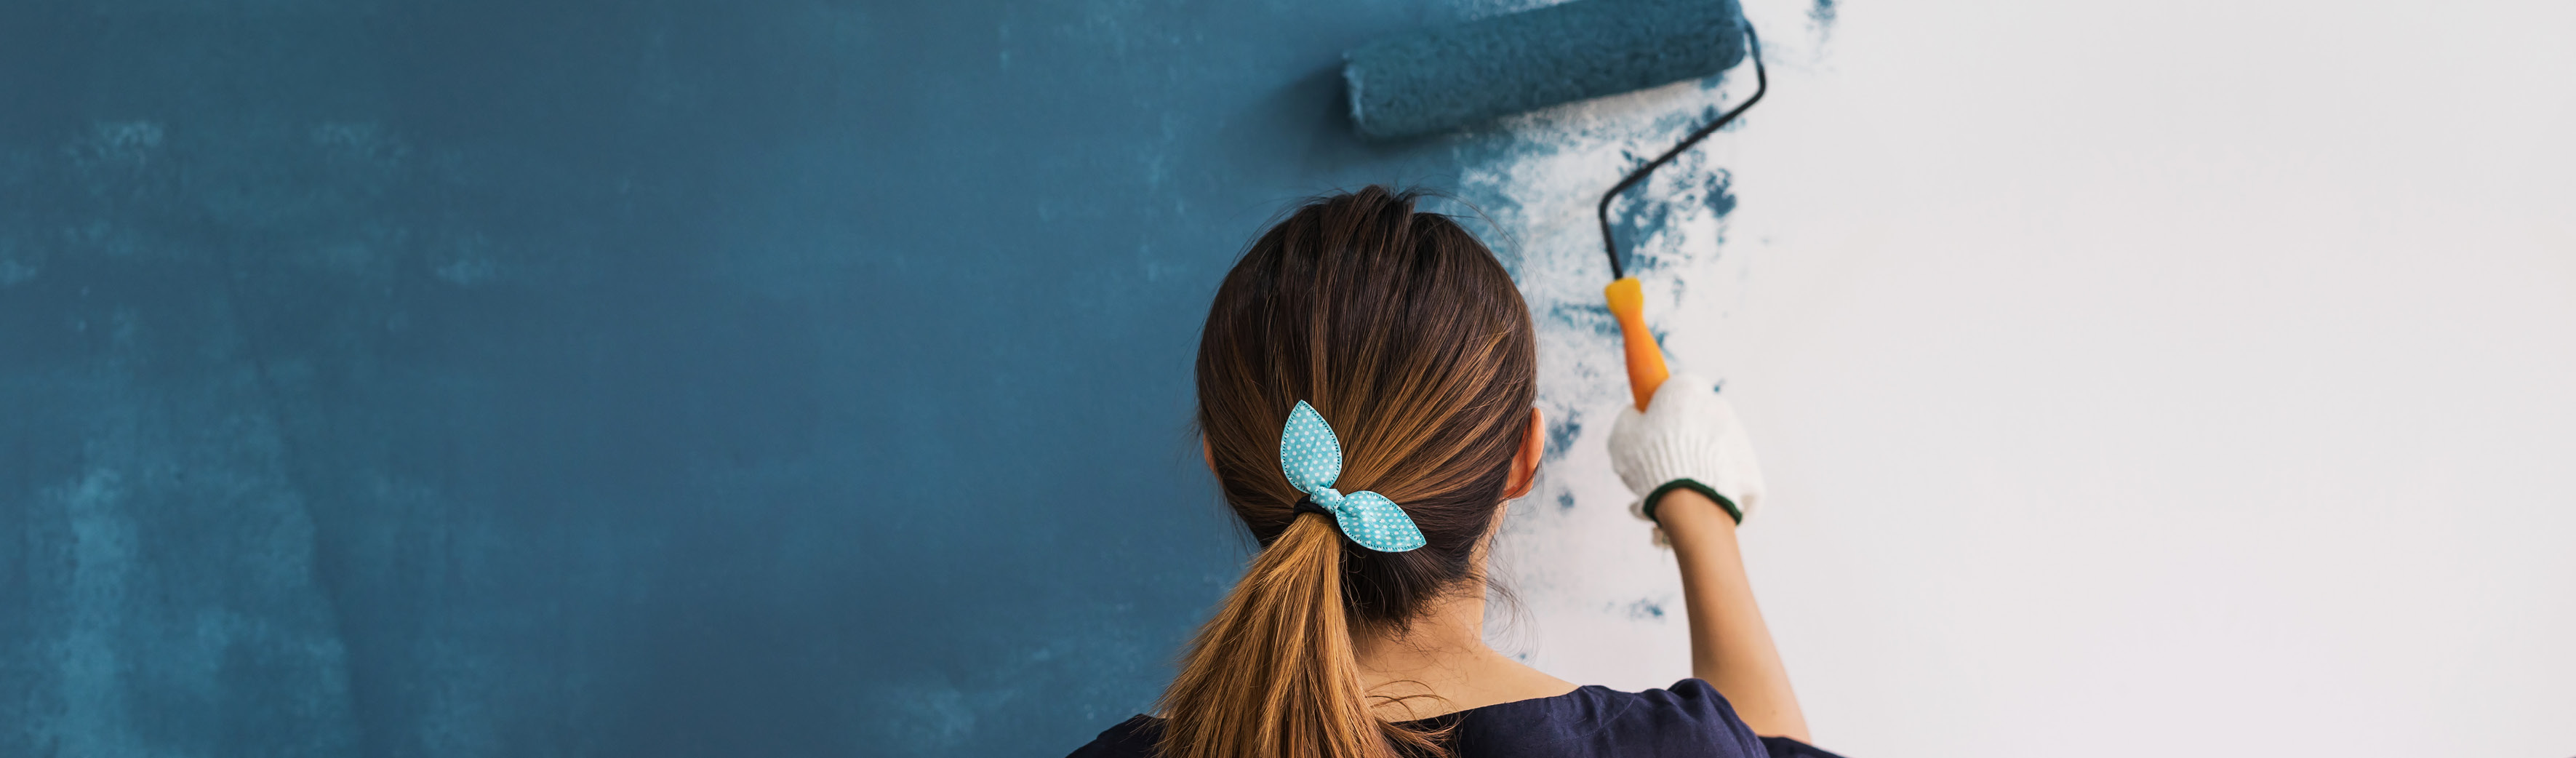 5 Ways to Make Home Improvements Affordable